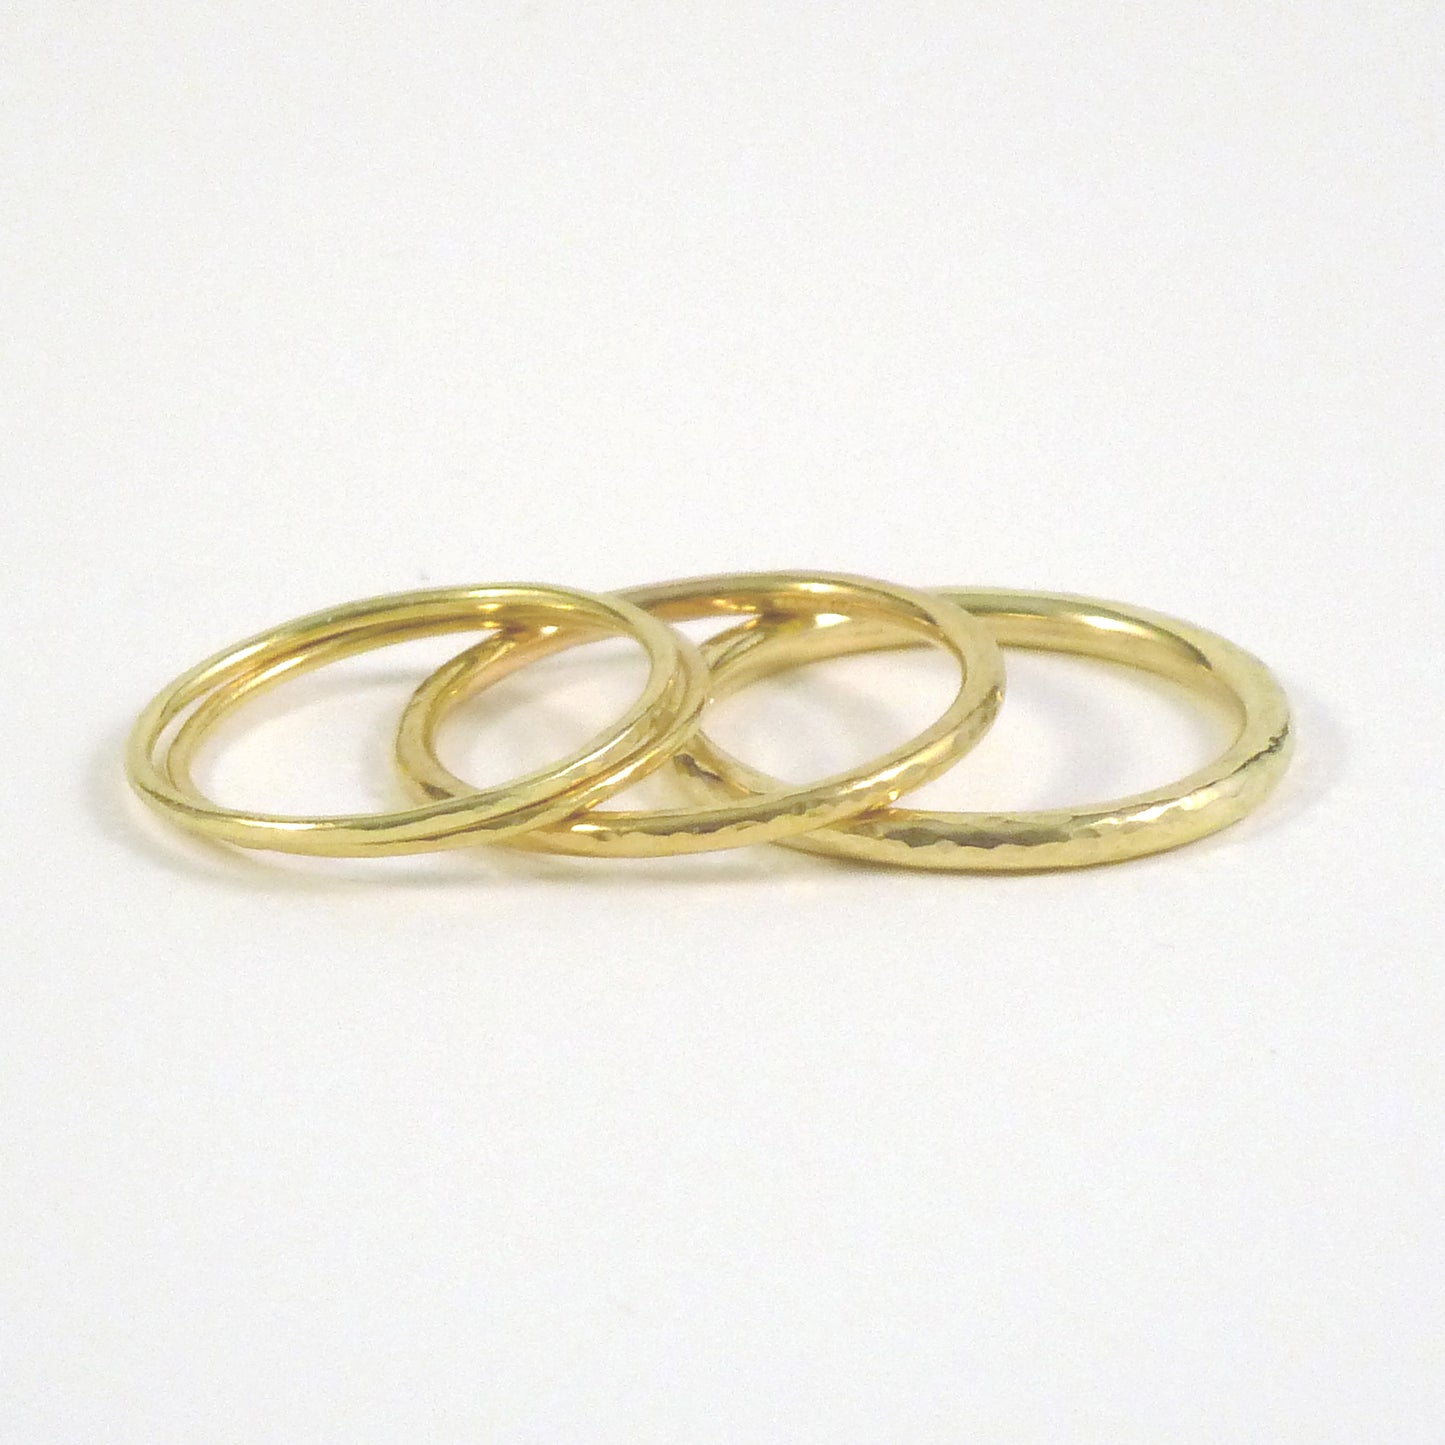 3 stacked bands, from the left 1mm, 1.5mm and 2mm, 18ct yellow gold, hammered finish